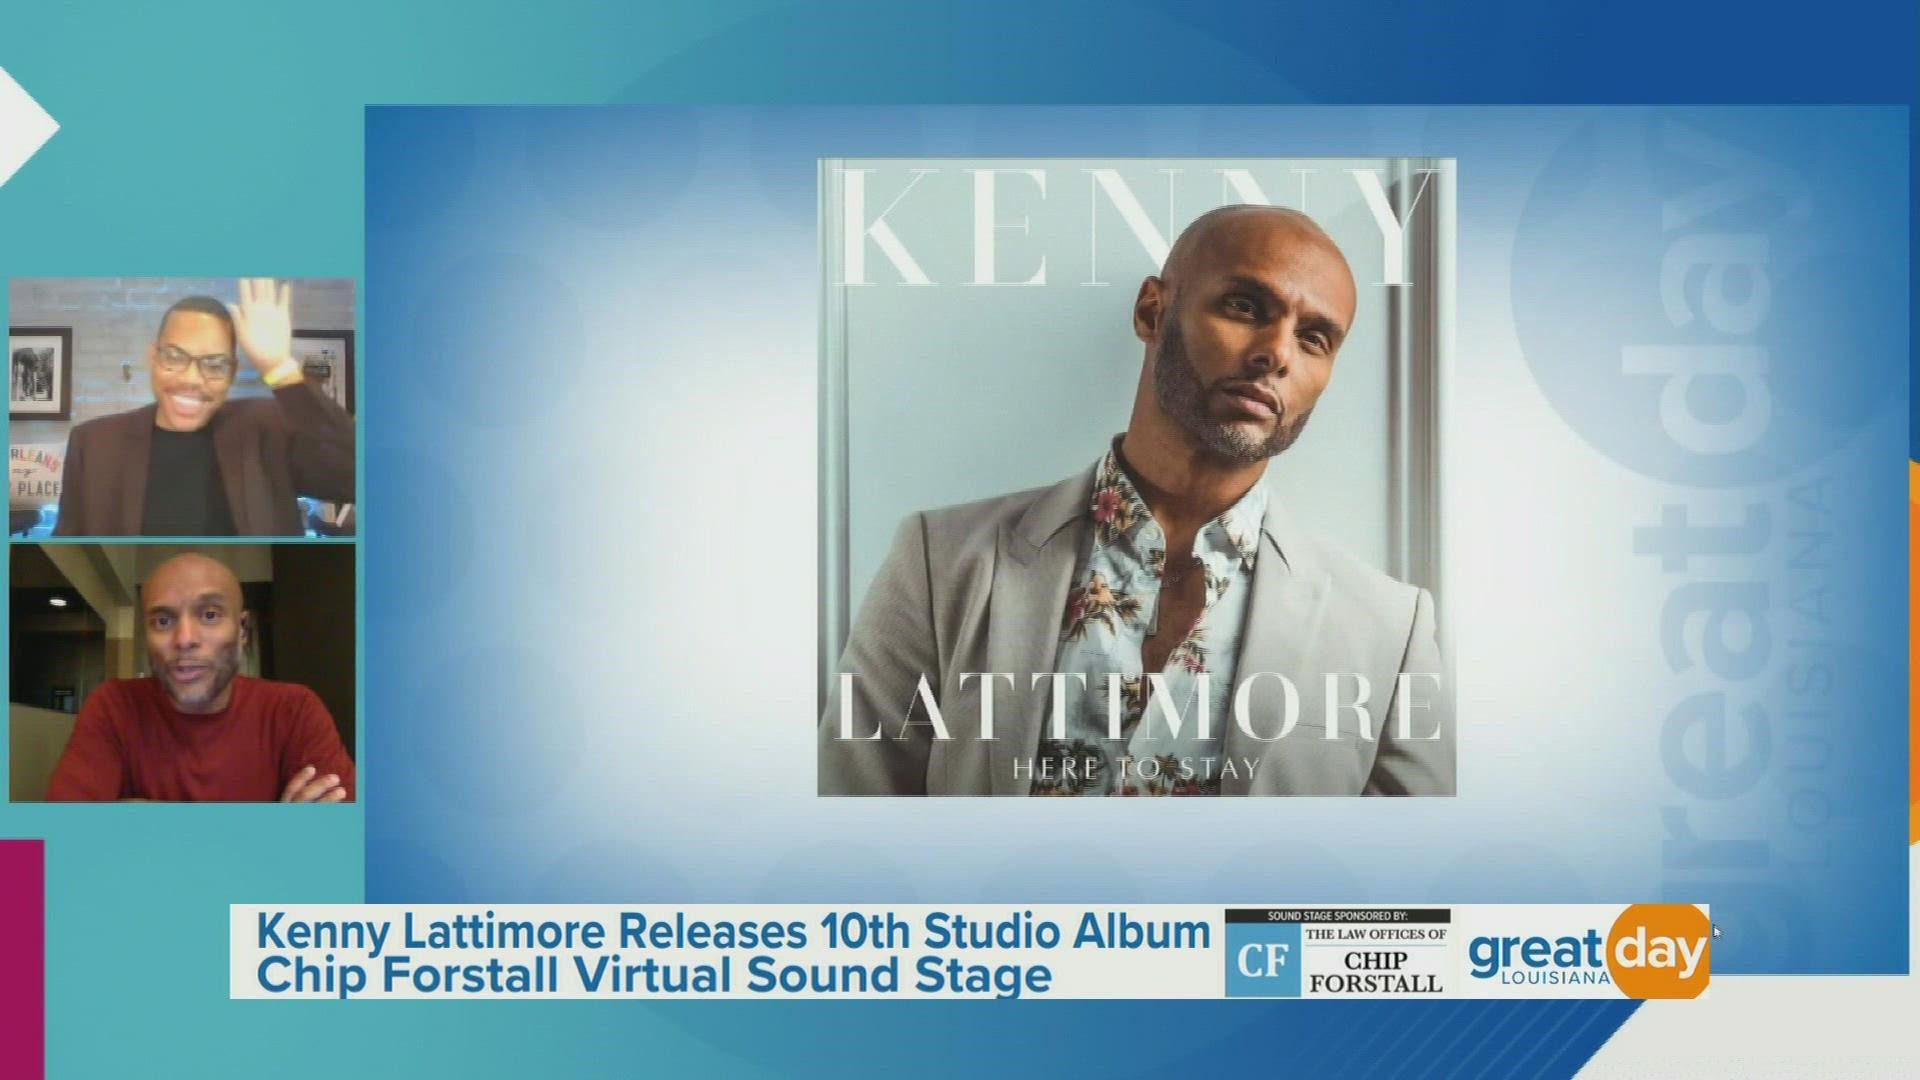 Grammy-nominated recording artist Kenny Lattimore discussed his 10th album, "Here To Stay." He also shared the music video for his latest hit "Pressure."